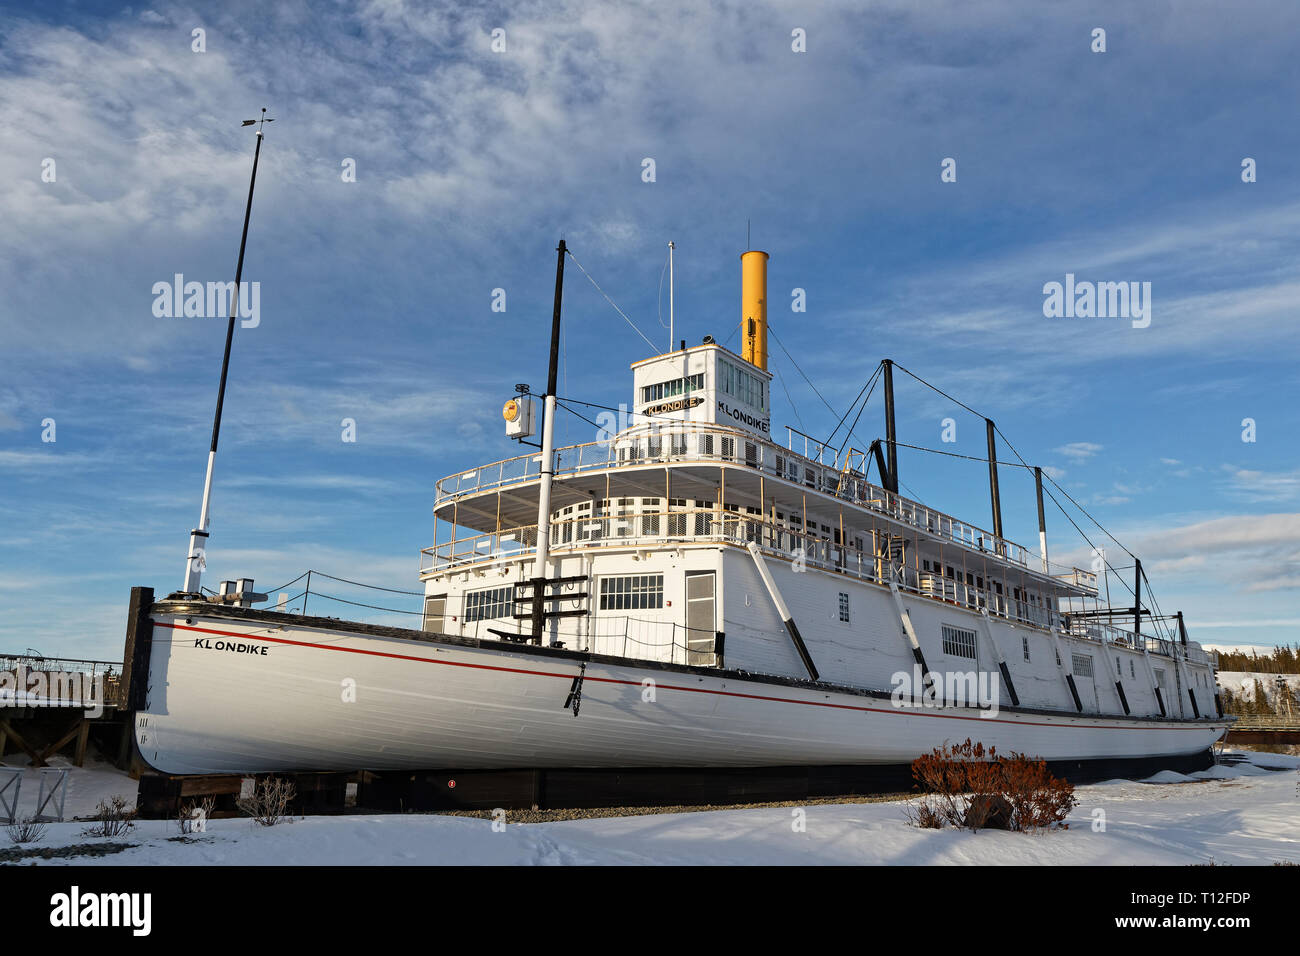 WHITEHORSE, YUKON, CANADA, March 9, 2019 : Famous SS Klondike steamer on the Yukon river banks. Whitehorse is the capital and only city of Yukon, and  Stock Photo